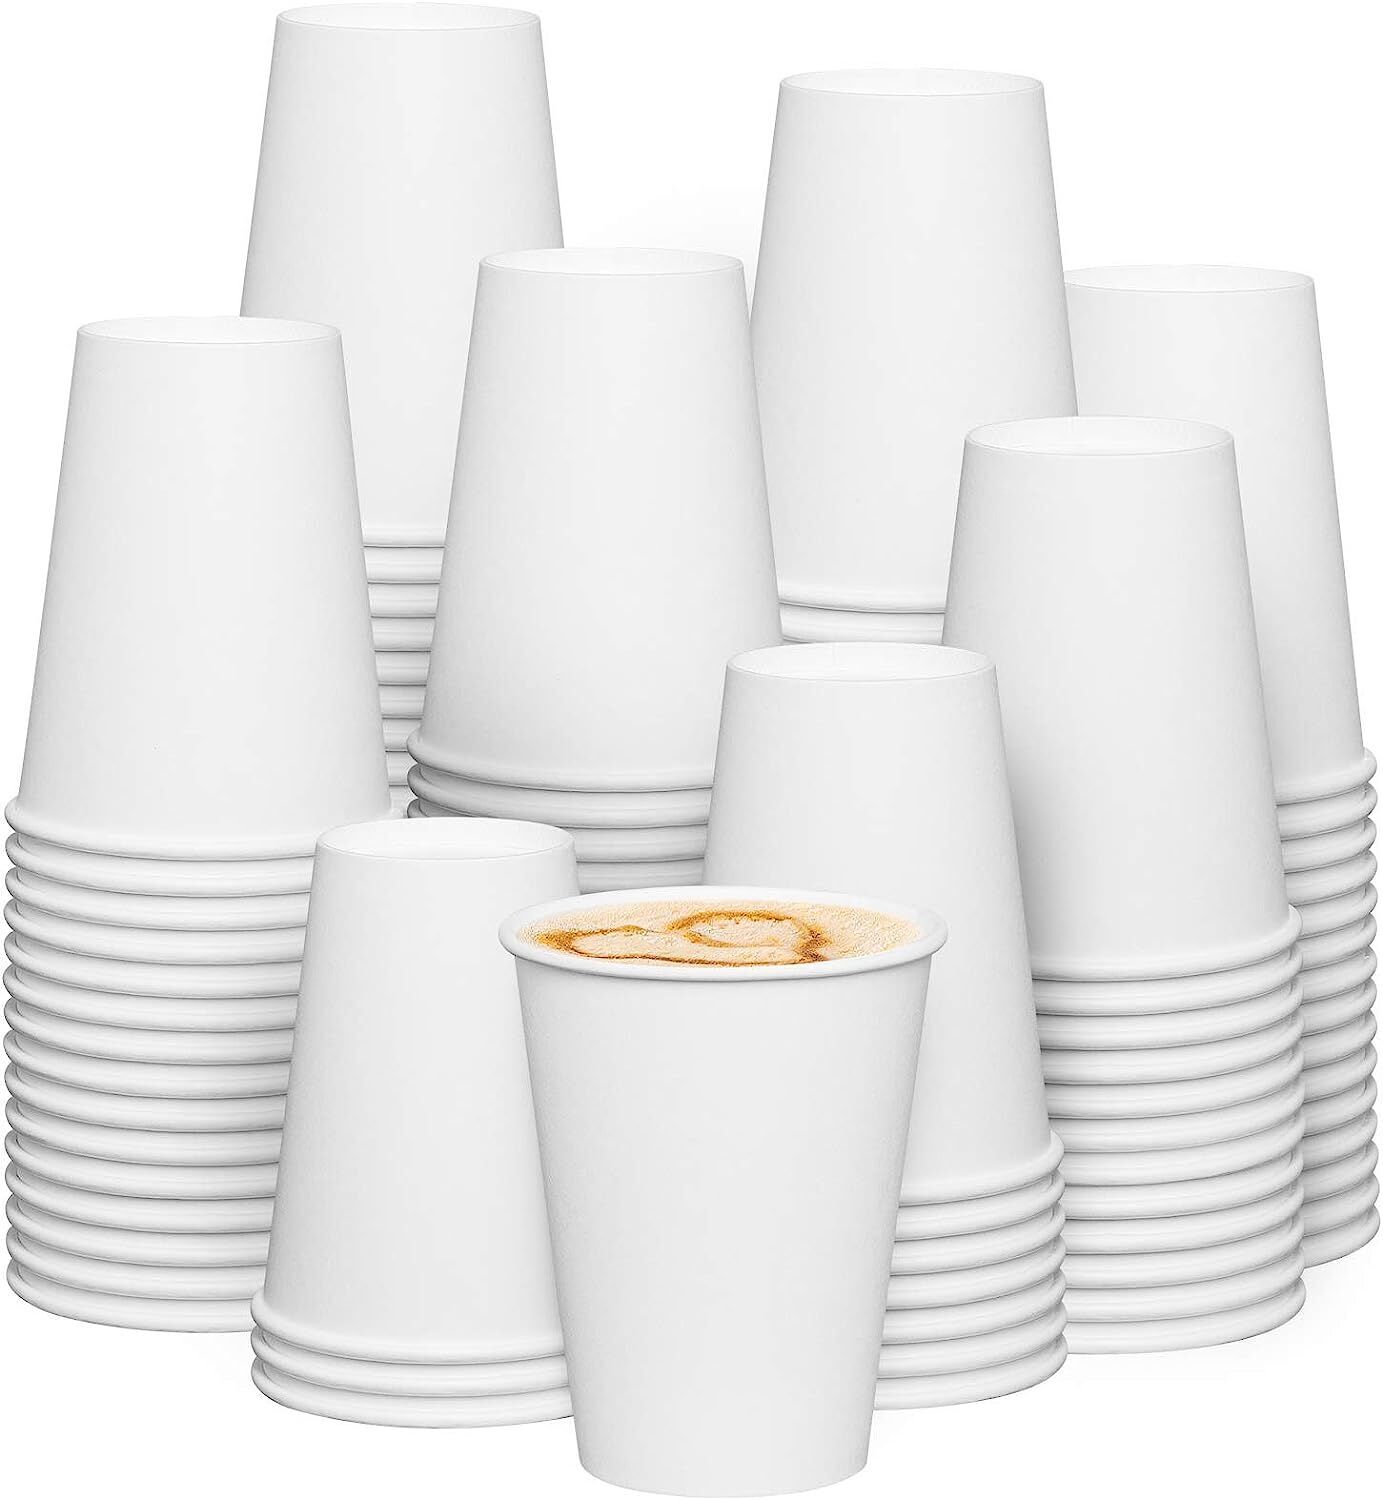 12 oz Disposable Foam Cups (100 Pack), White Foam Cup Insulates Hot & Cold Beverages, Made in The USA, To-Go Cups - for Coffee, Tea, Hot Cocoa, Soup